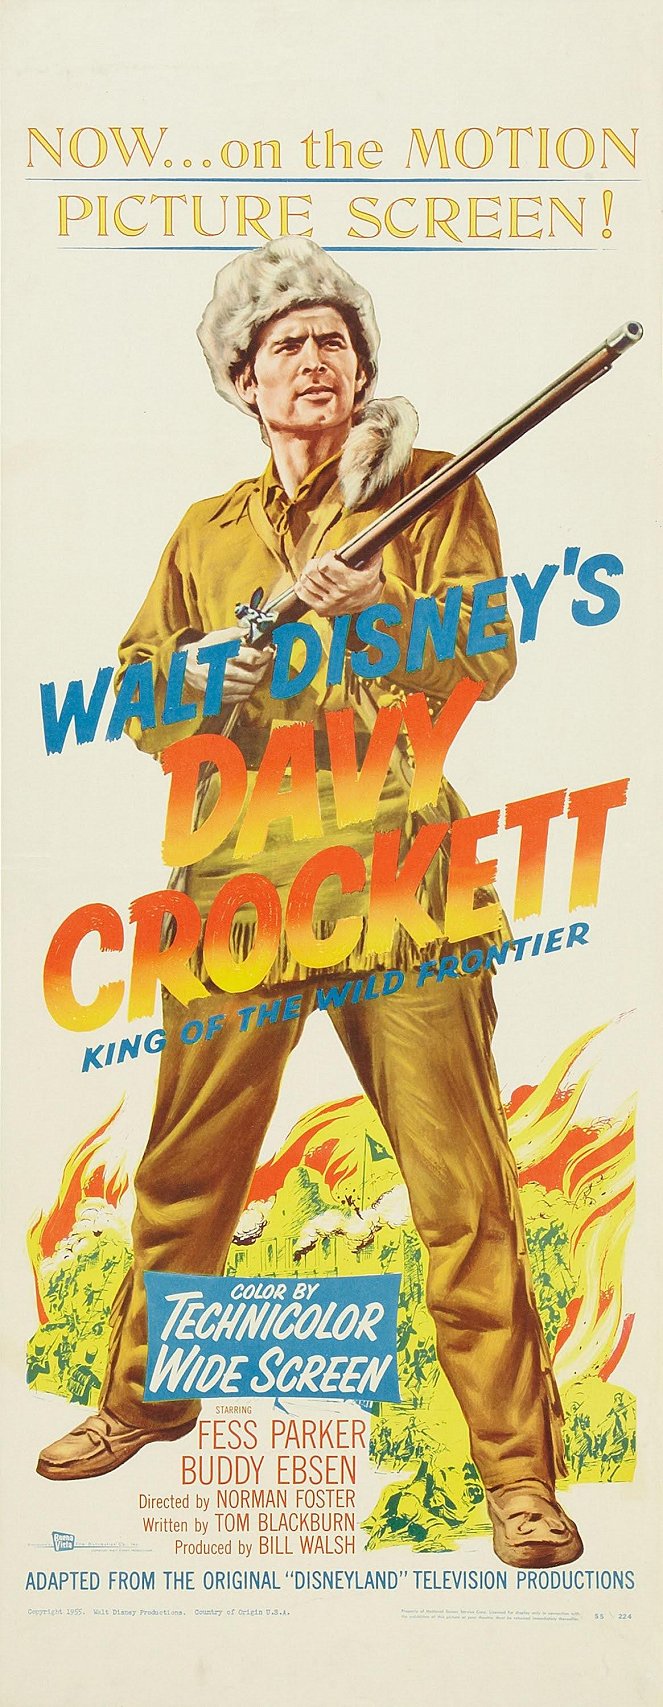 Davy Crockett, King of the Wild Frontier - Posters